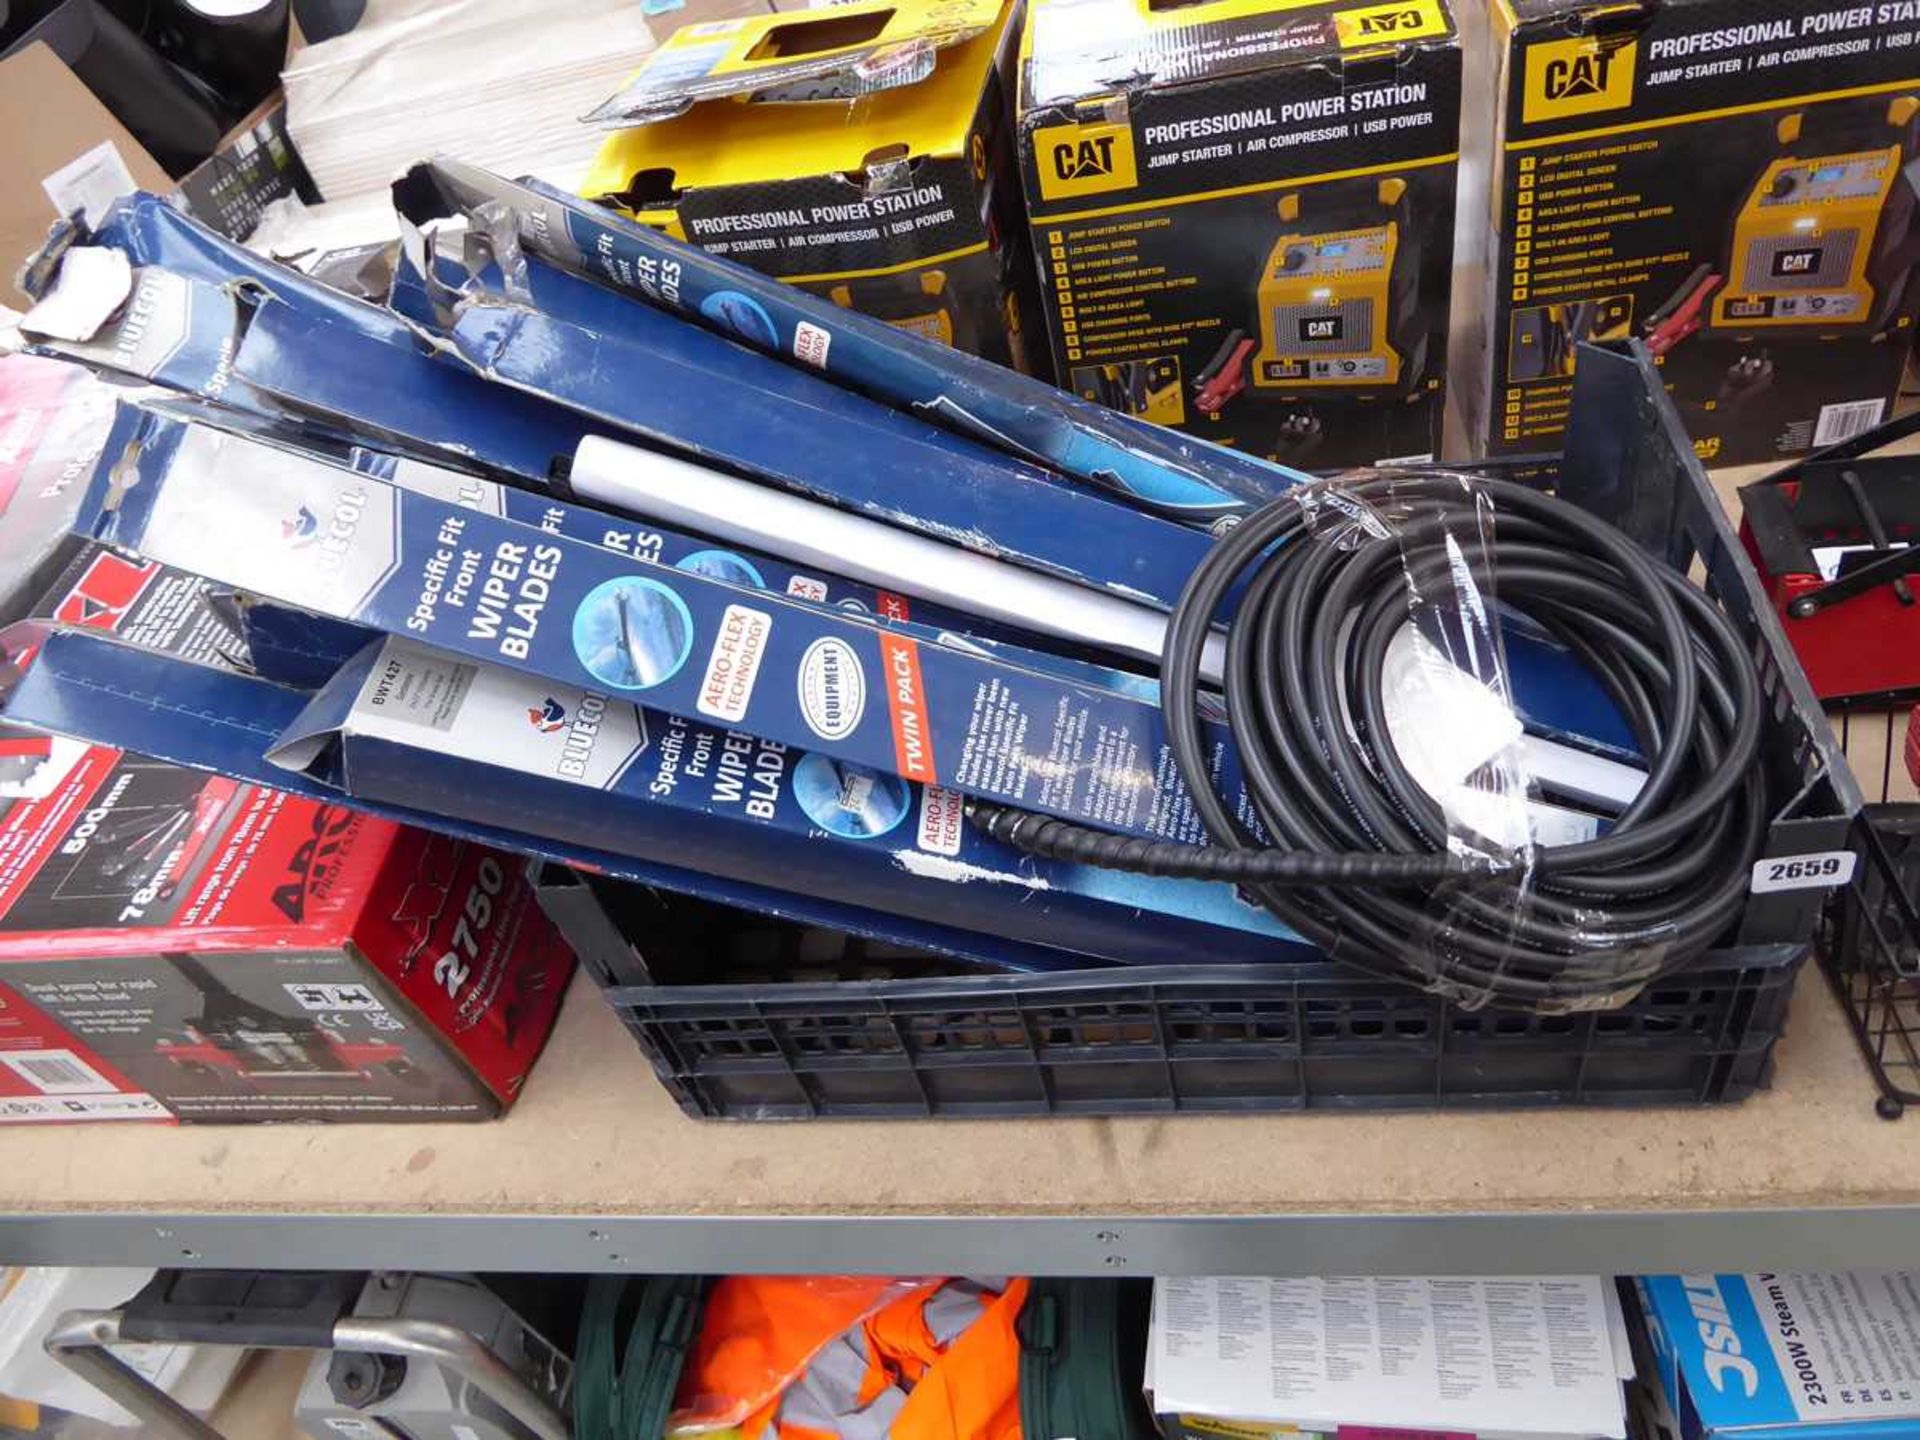 Crate containing Bluecol wiper blades (mixed sizes)